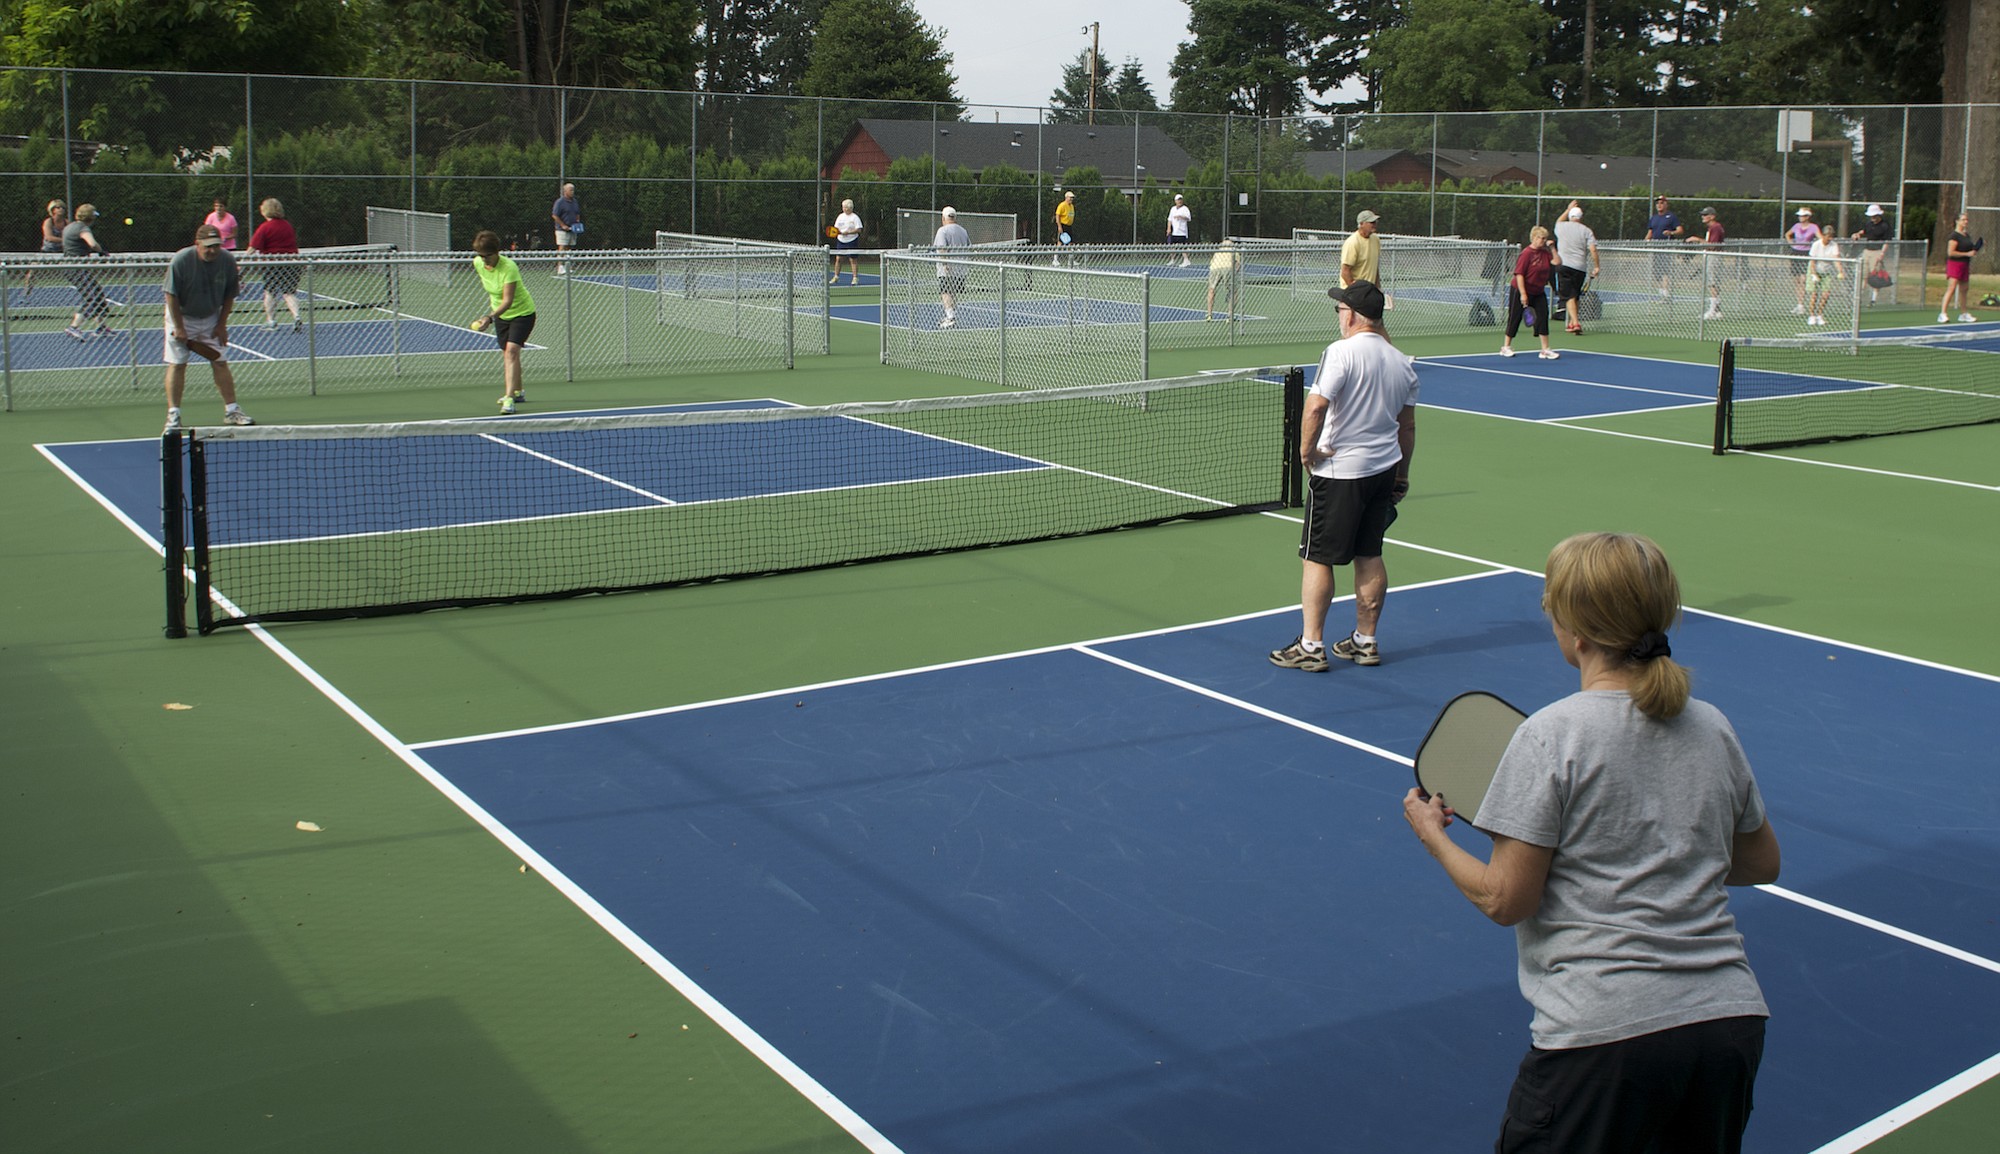 Dozens of people showed up to play pickleball at Hathaway Park on Monday morning.